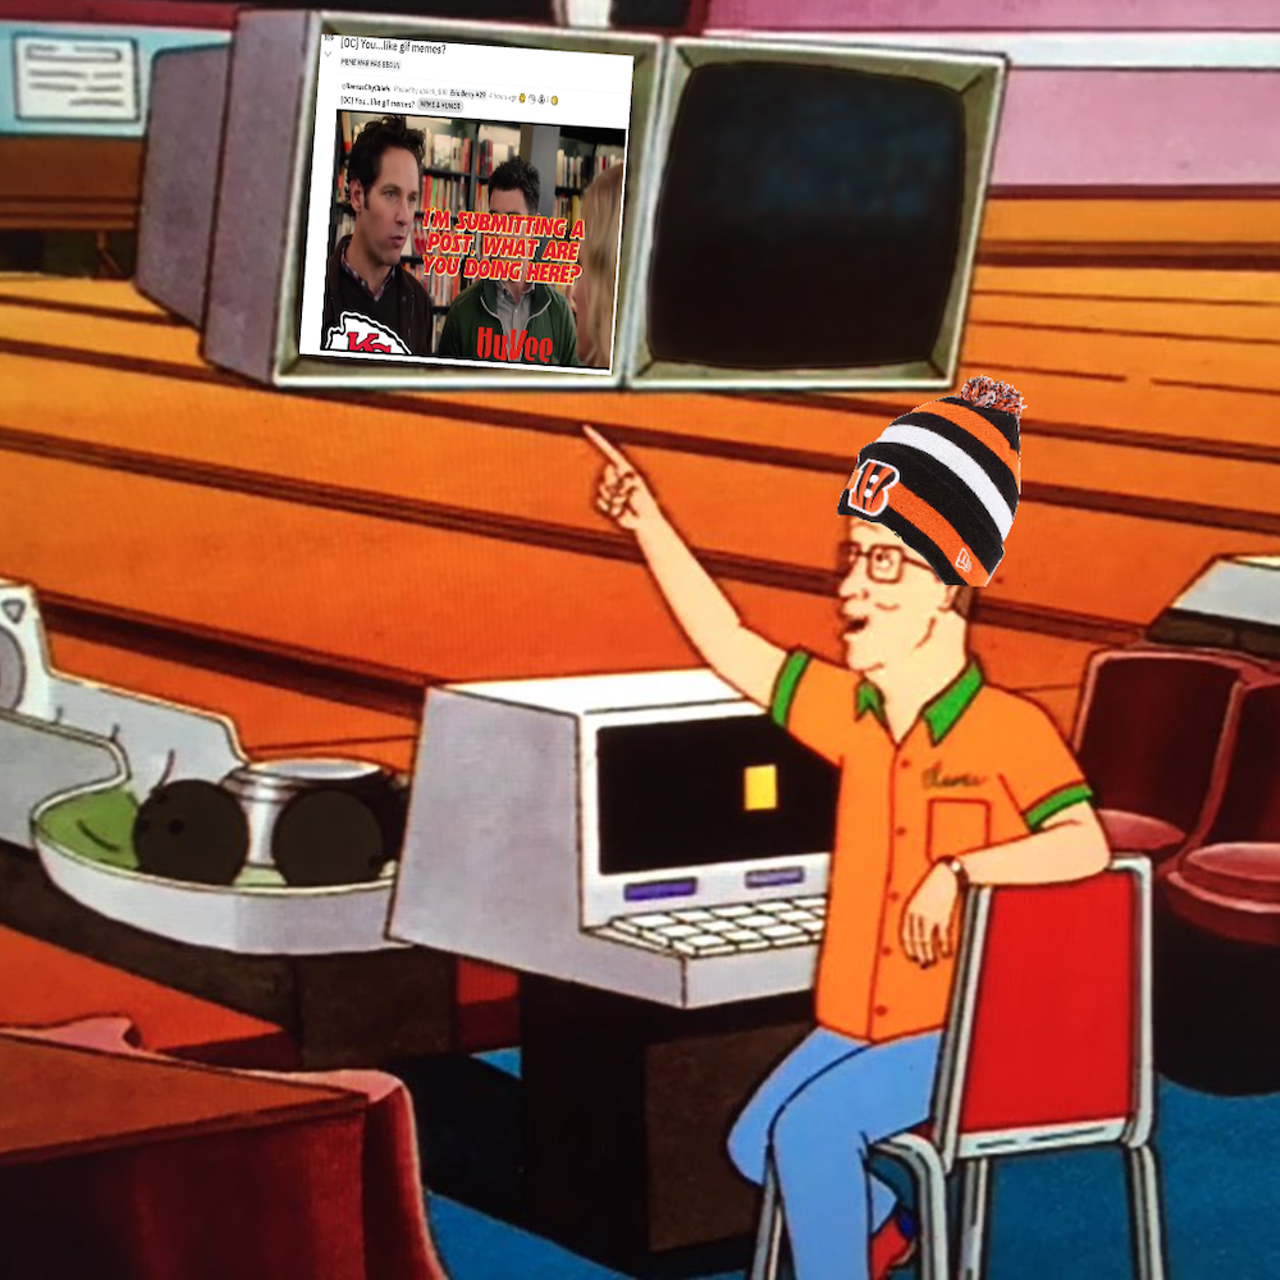 “Look, Peggy! The Chiefs fans are back, and we've still got almost a whole week before they're crying again!”